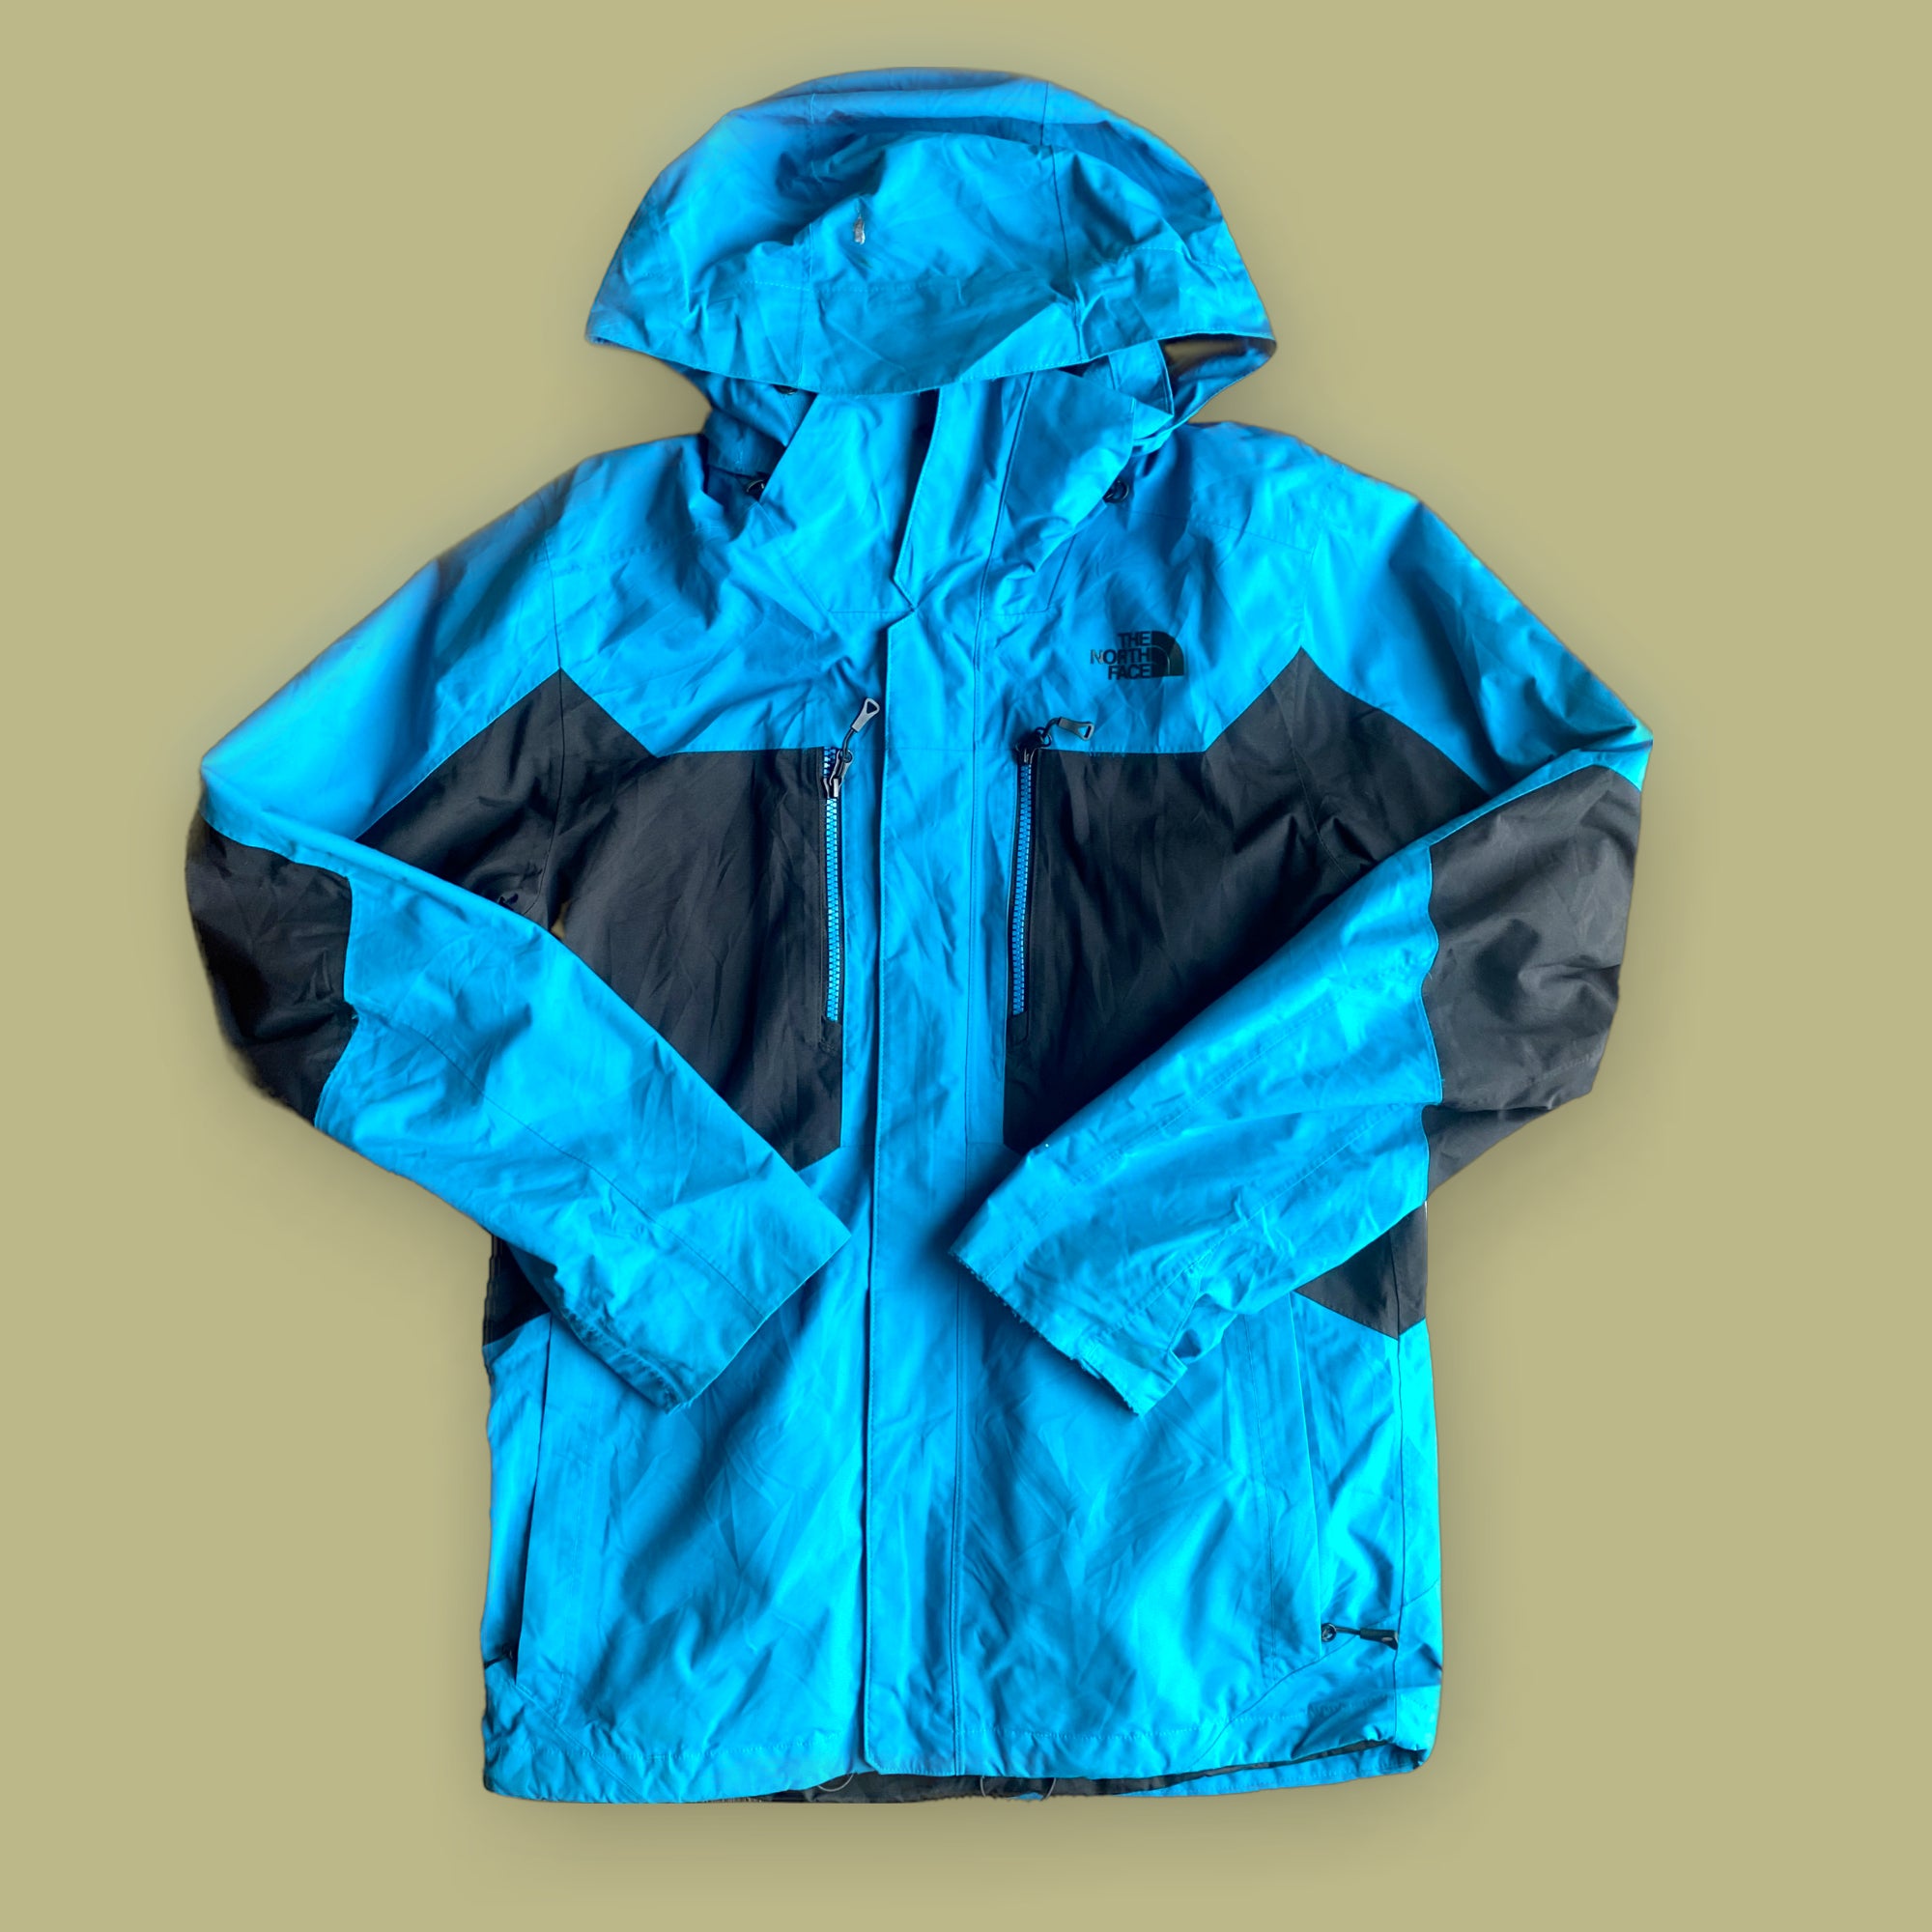 2000s The North Face Shell Jacket Blue